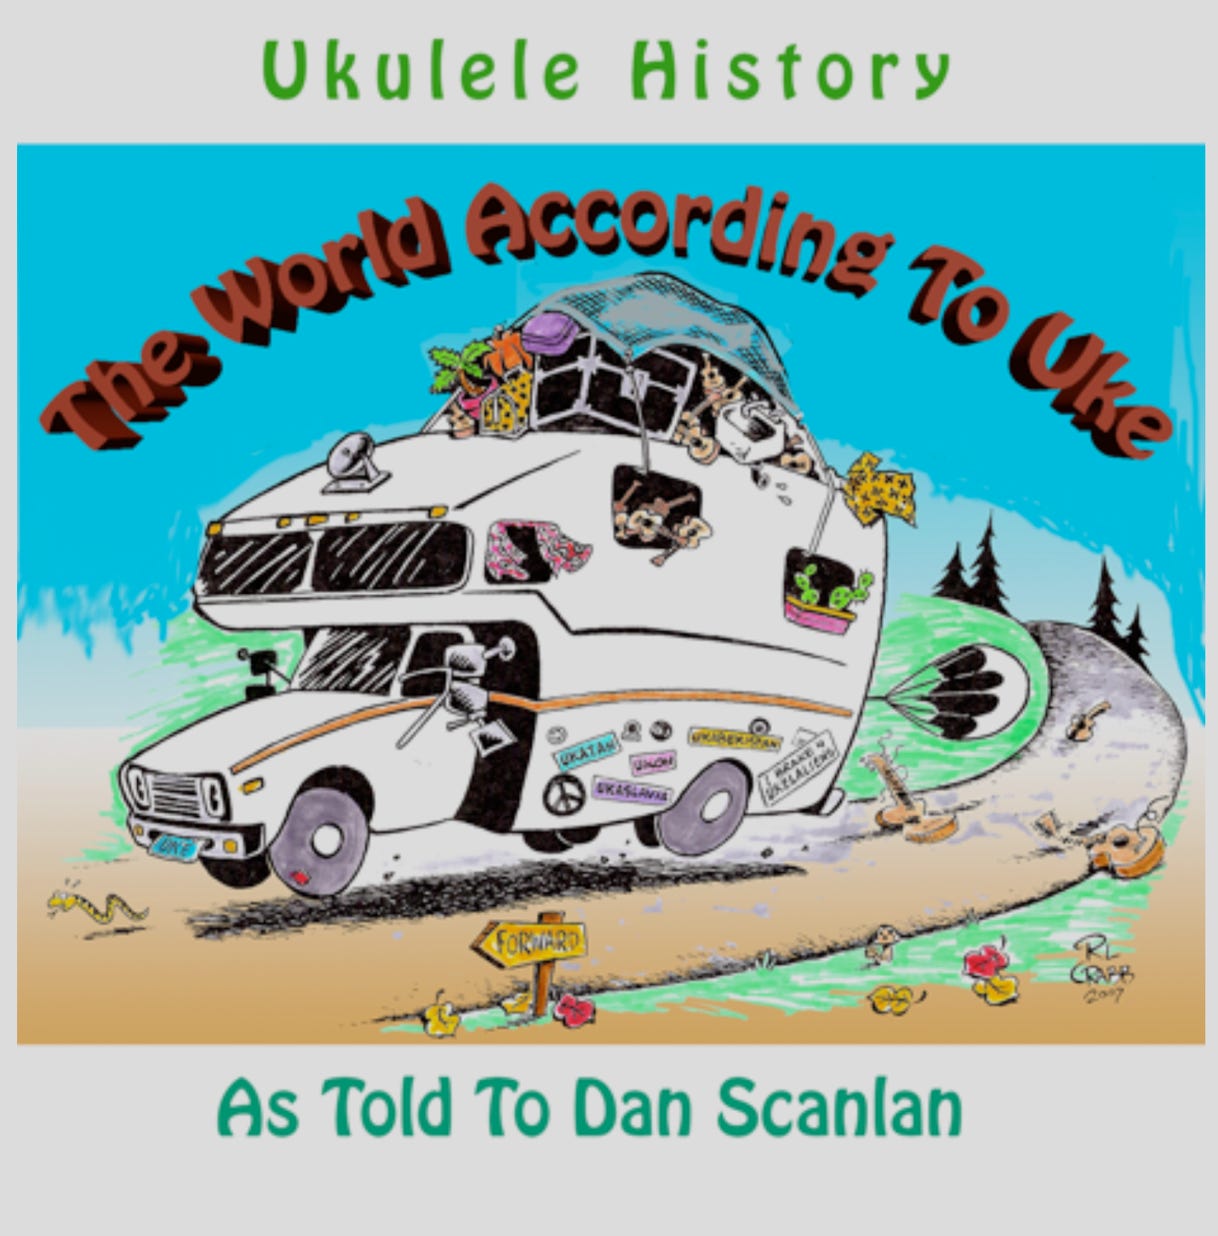 A history of the forces and cultures that married together to create the ukulele, and more.